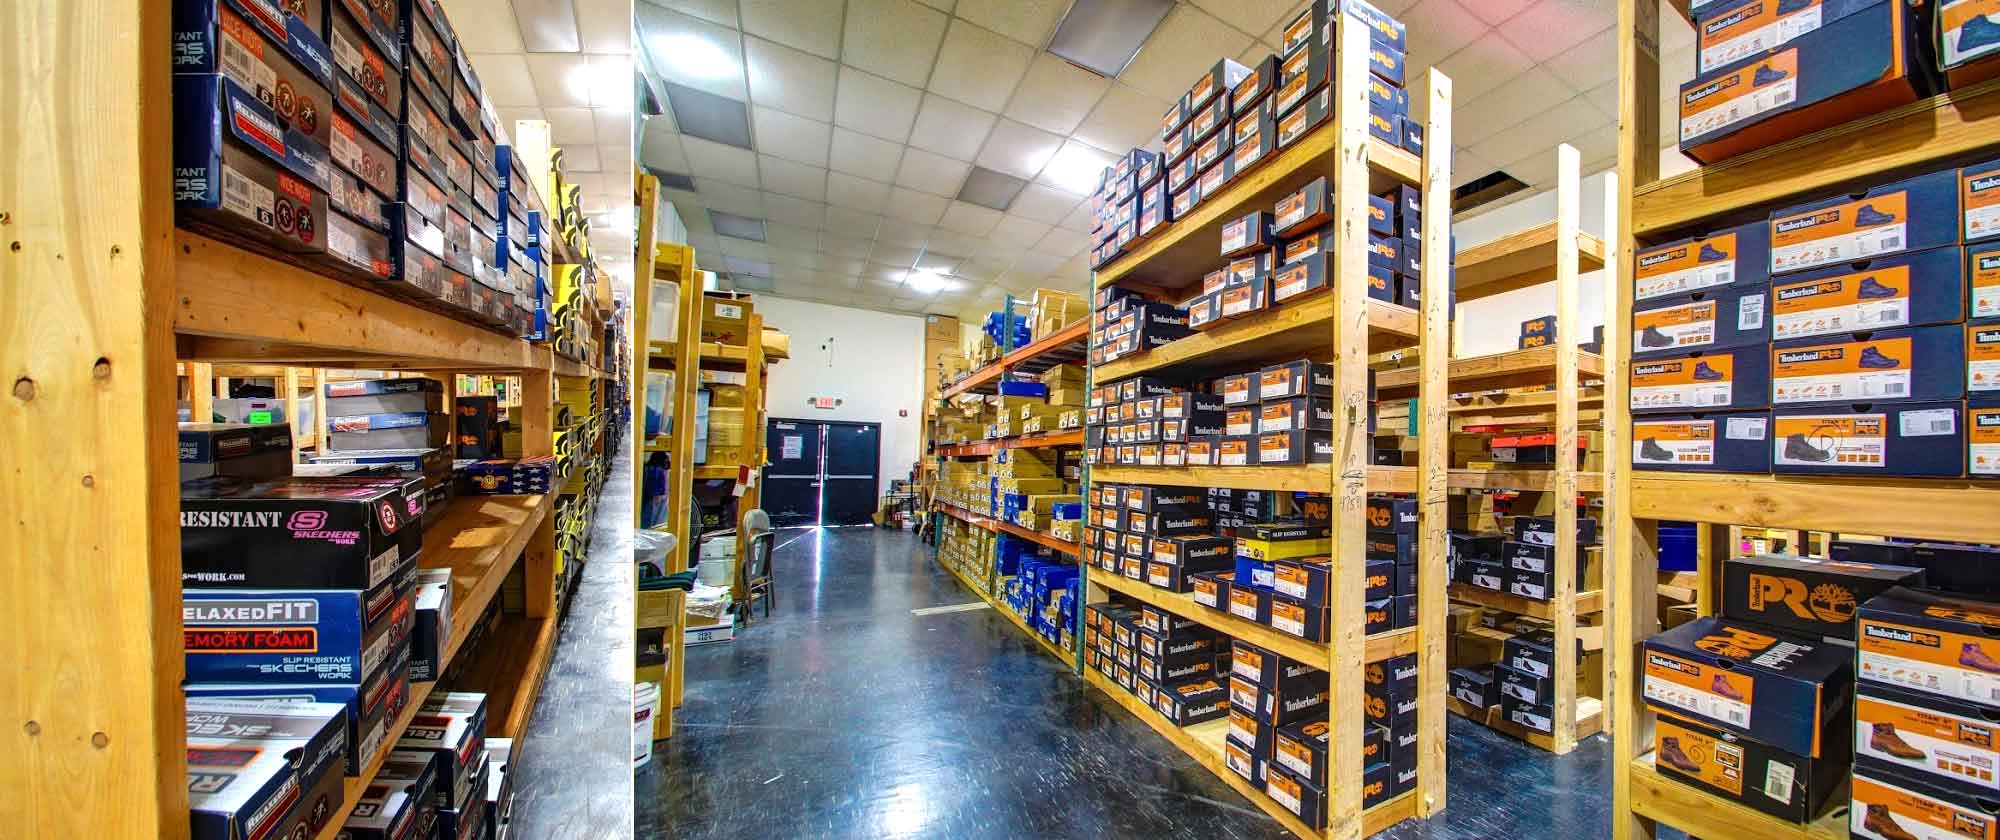 Warehouse - Large collection of quality name brand footwear and uniforms.